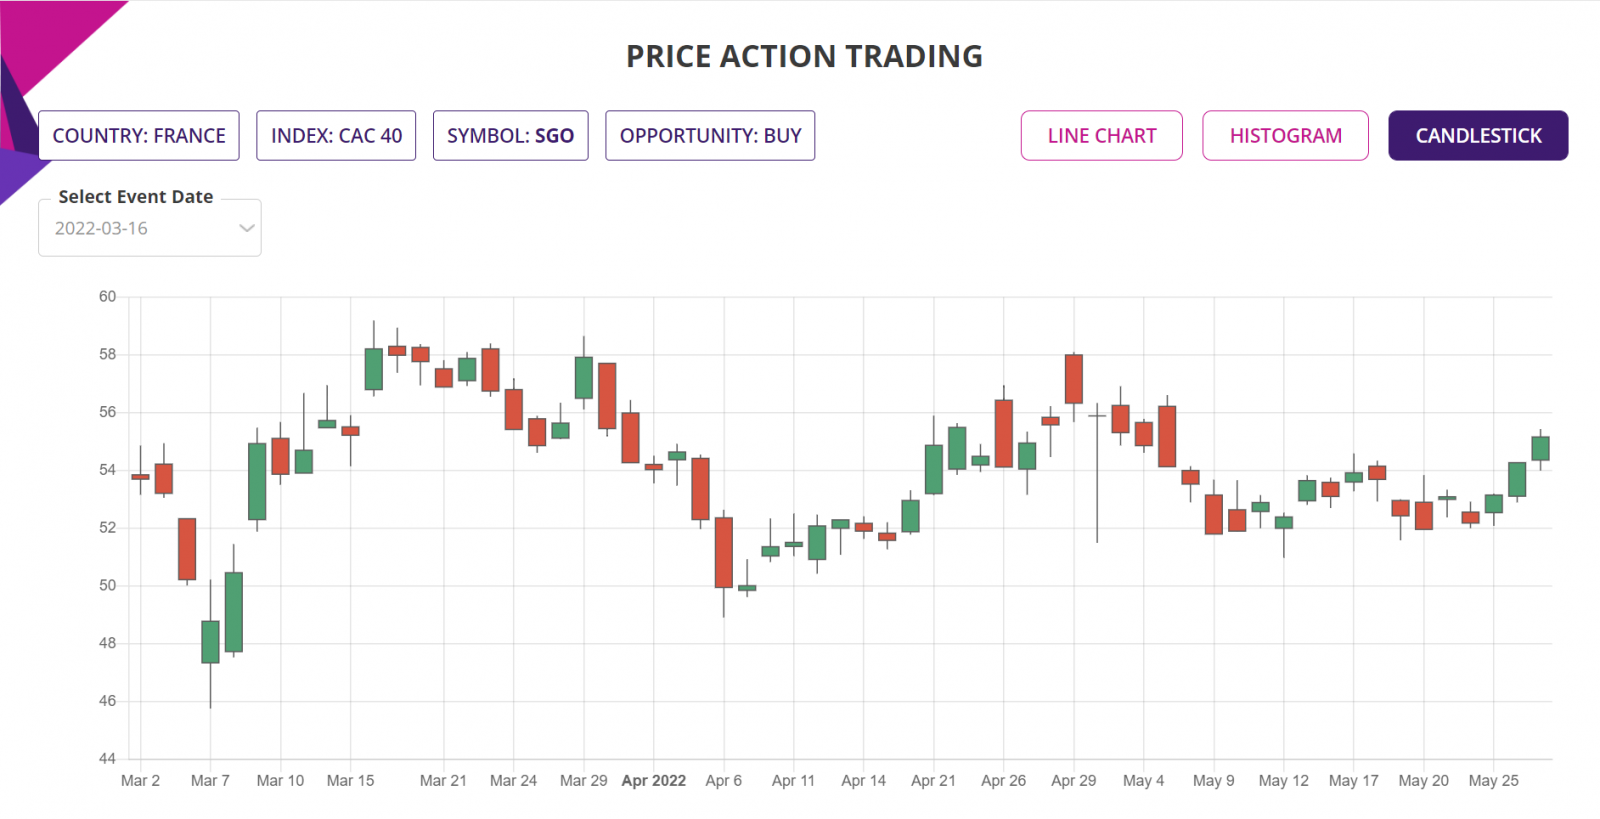 Price action trading candlestick chart